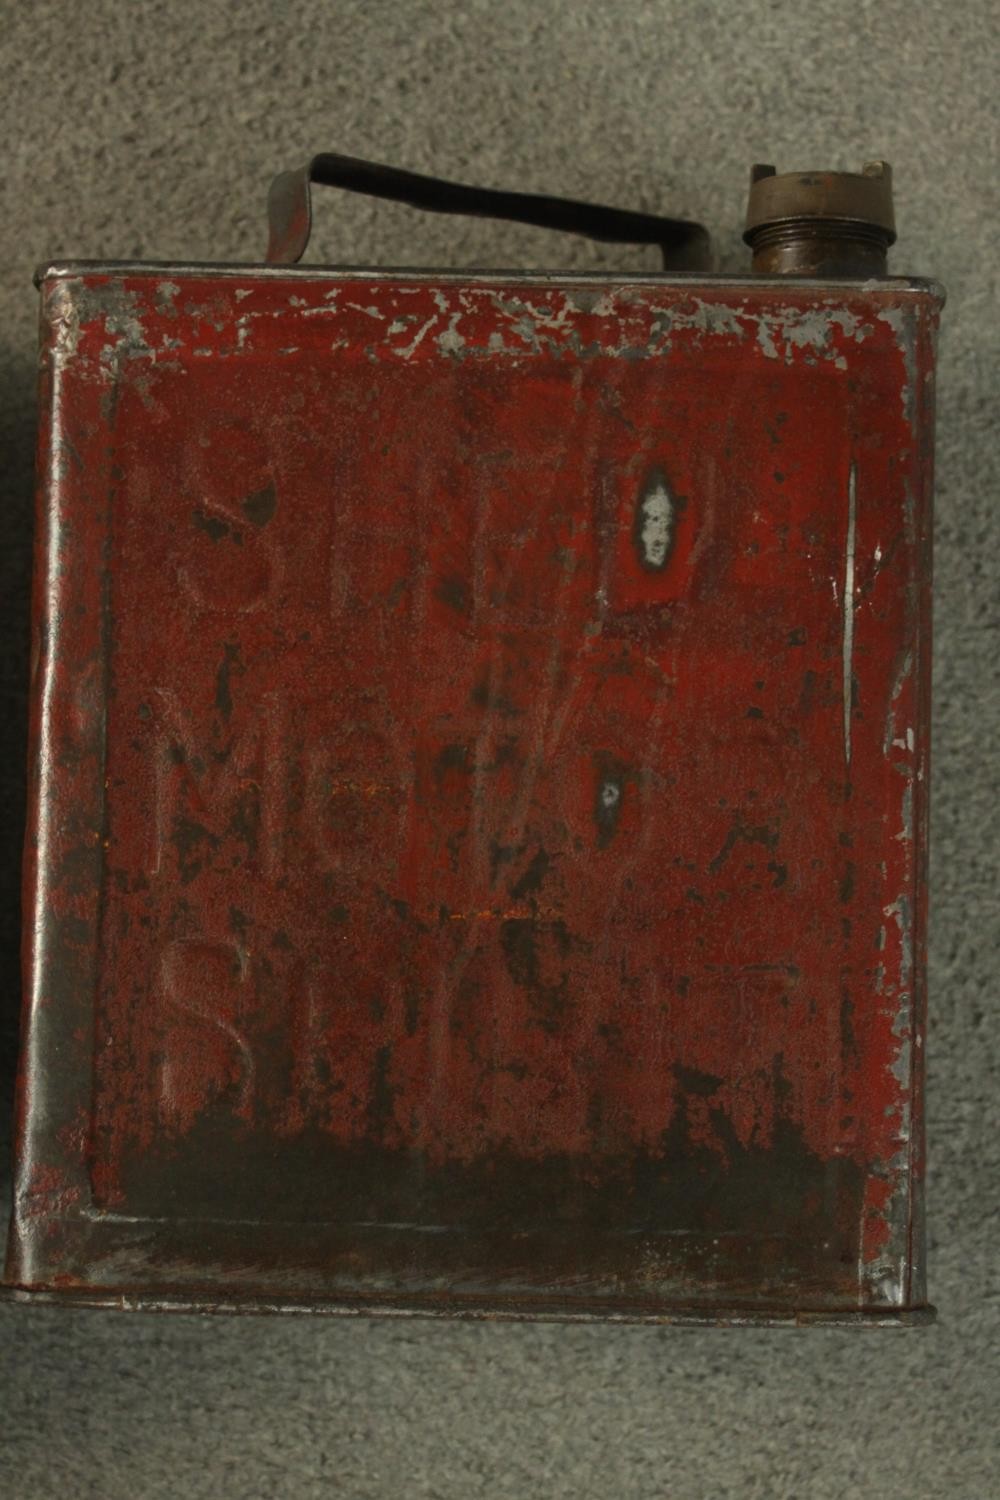 Four 20th century painted metal Jerry cans, marked for O-D-M Ashford, Insect Repellent, BP Ltd Shell - Image 6 of 6